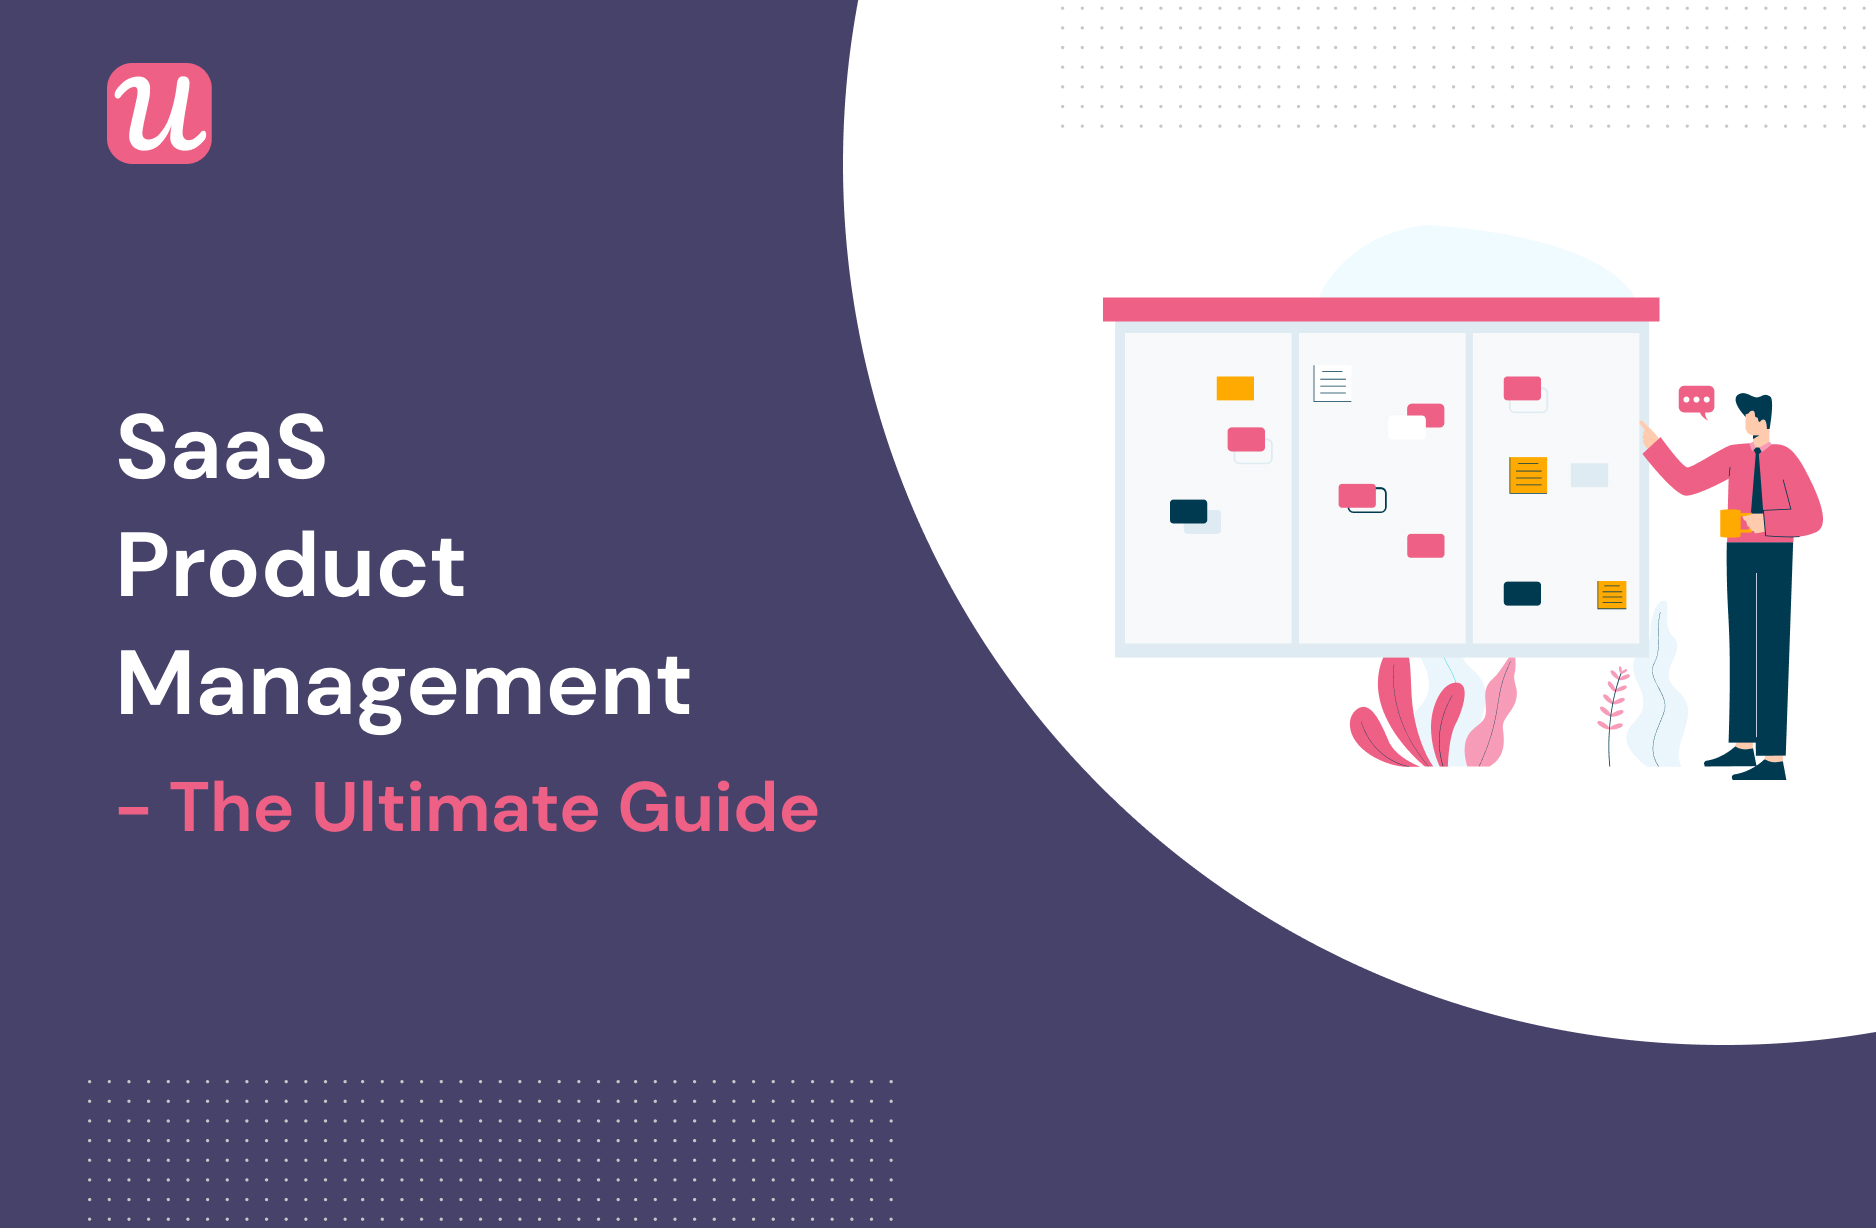 The Ultimate Guide to SaaS Product Management